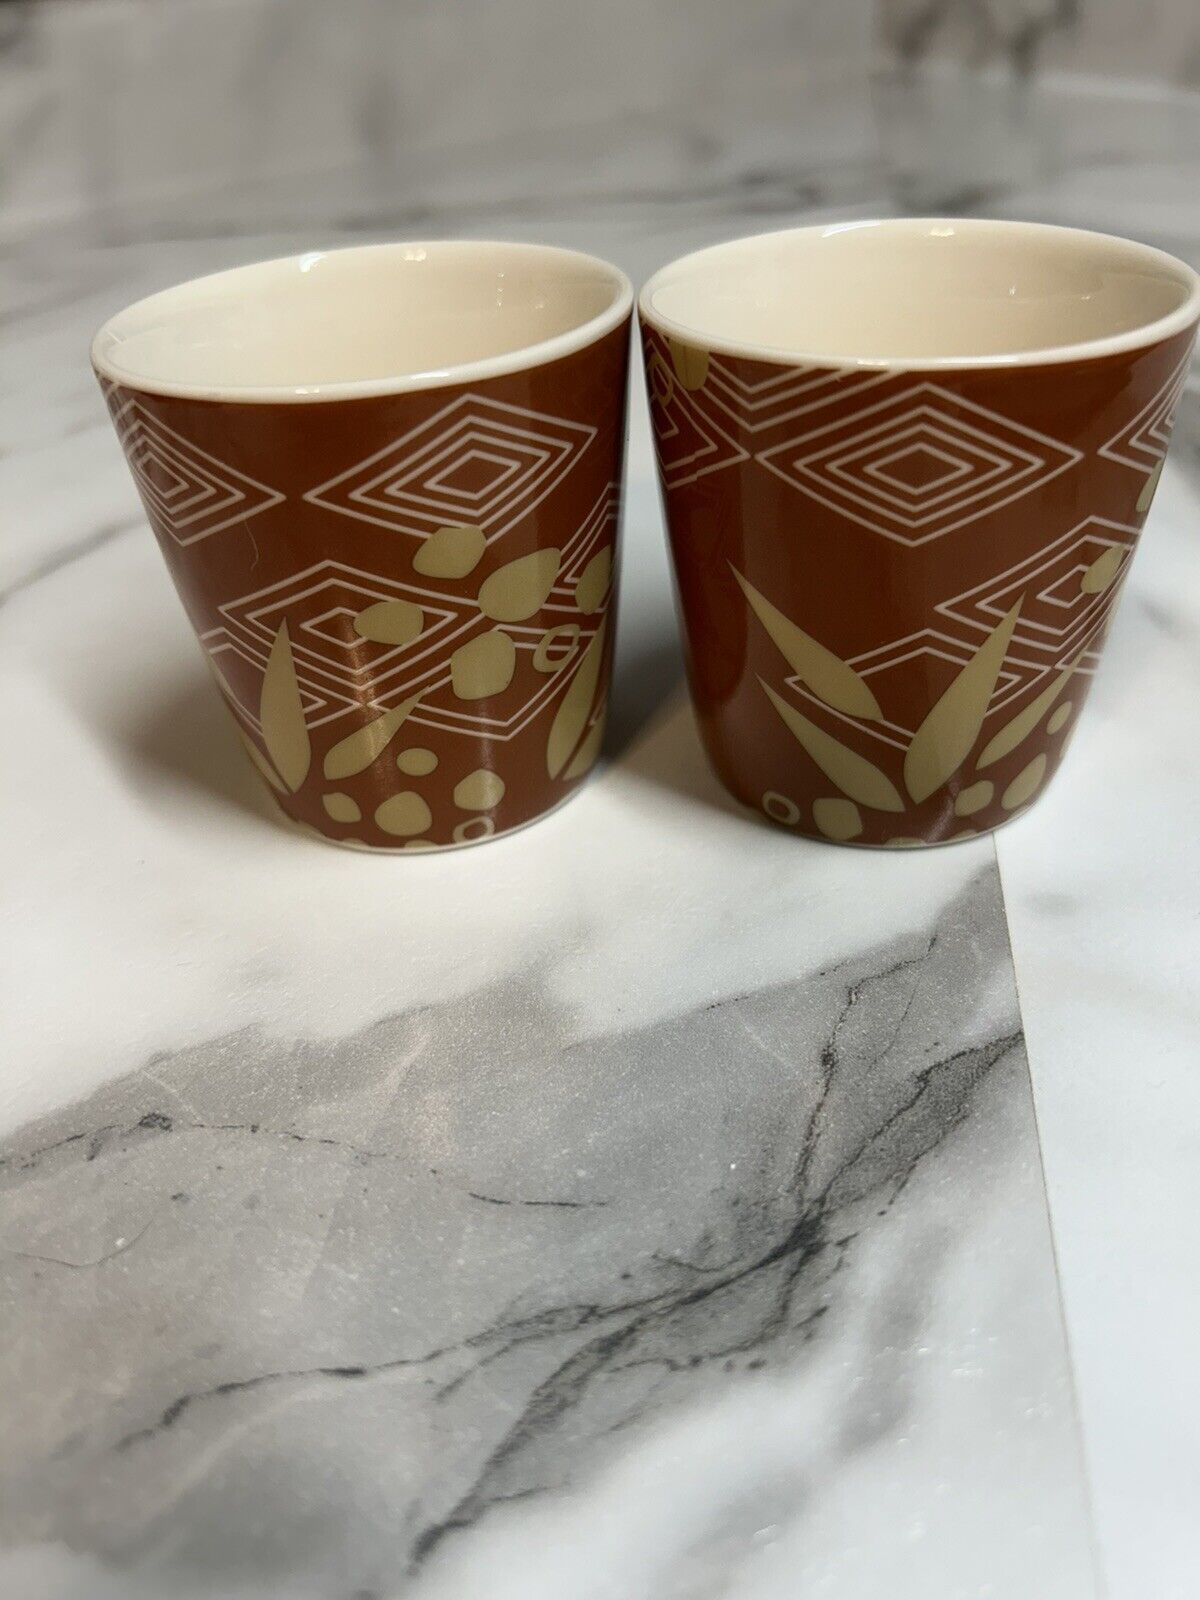 STARBUCKS 2013 ESPRESSO CUP BROWN BAMBOO PATTERN 3 OZ SET OF 2